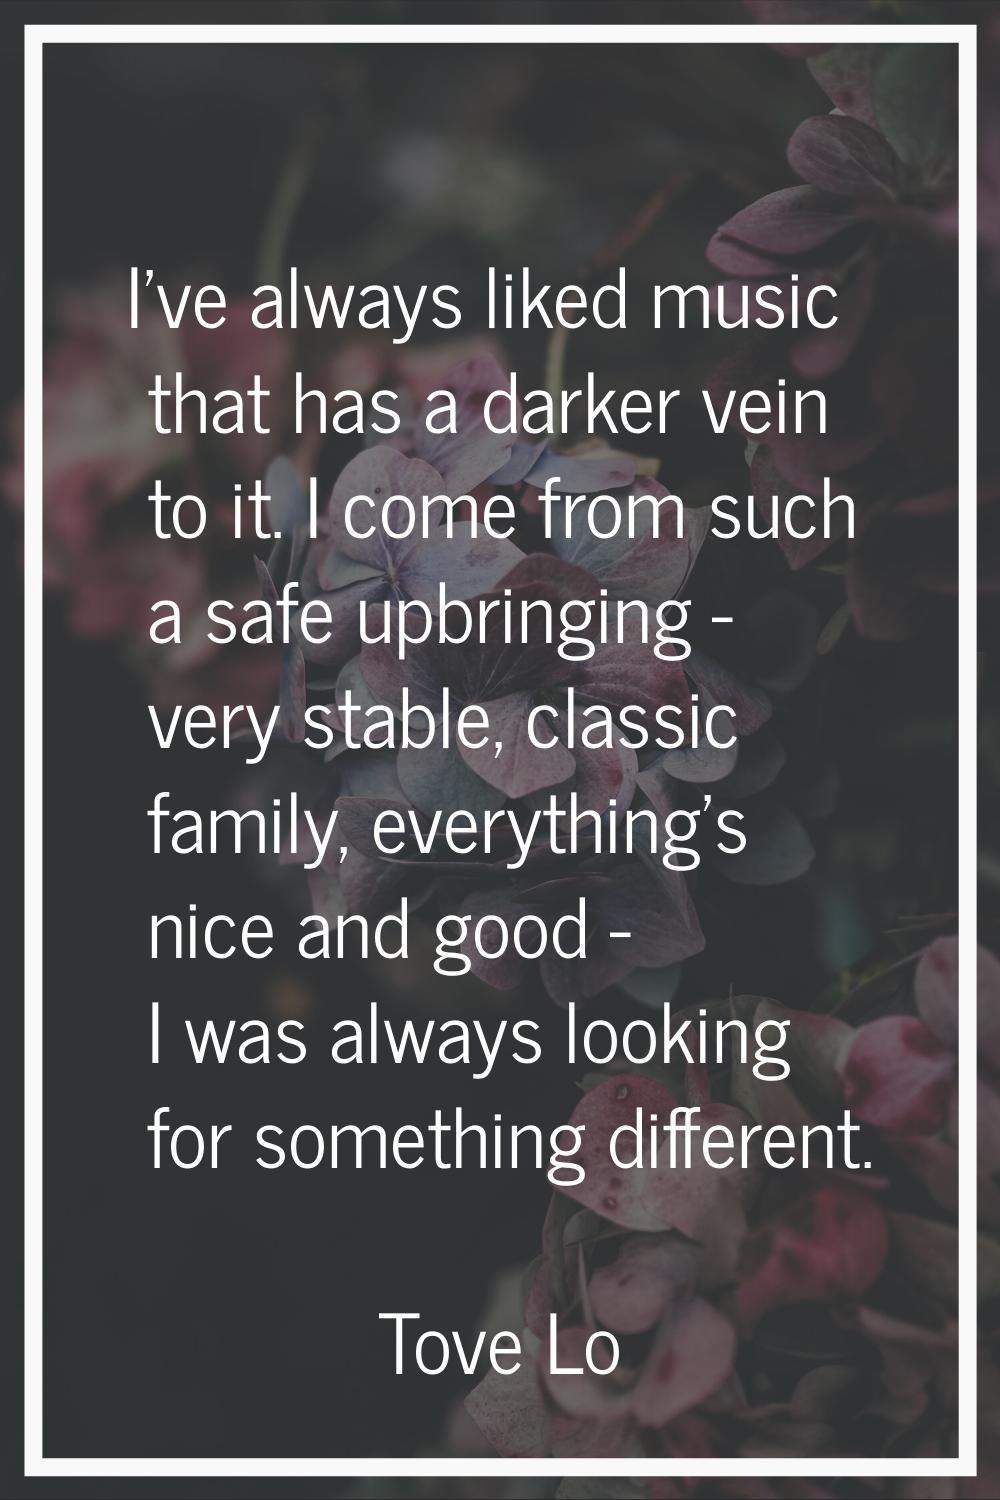 I've always liked music that has a darker vein to it. I come from such a safe upbringing - very sta